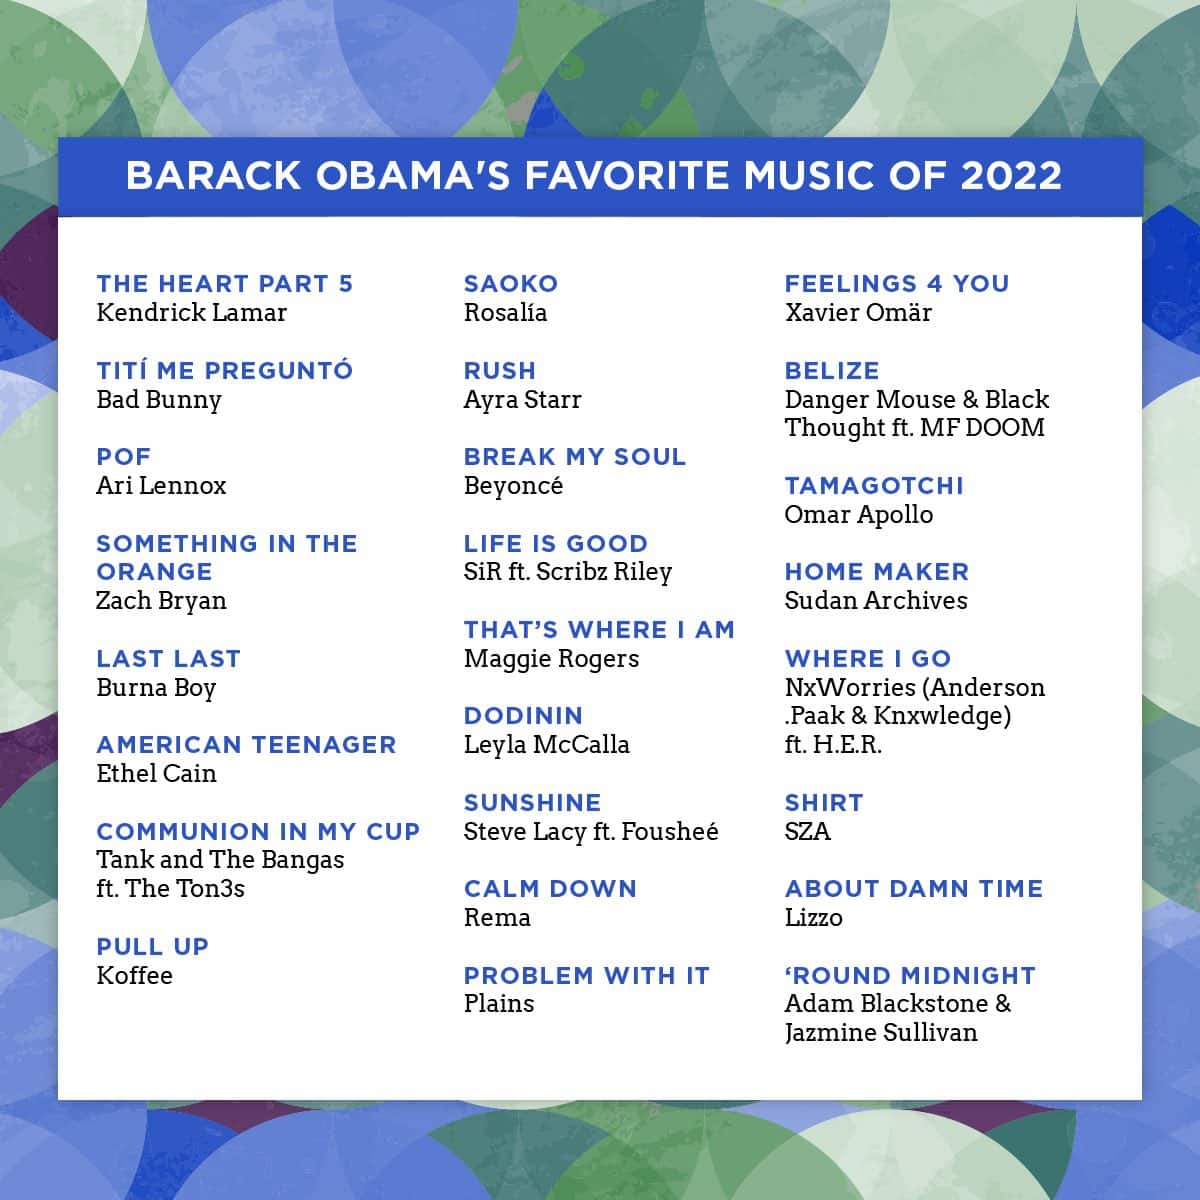 Rema's songs feature on Obama favourite songs 